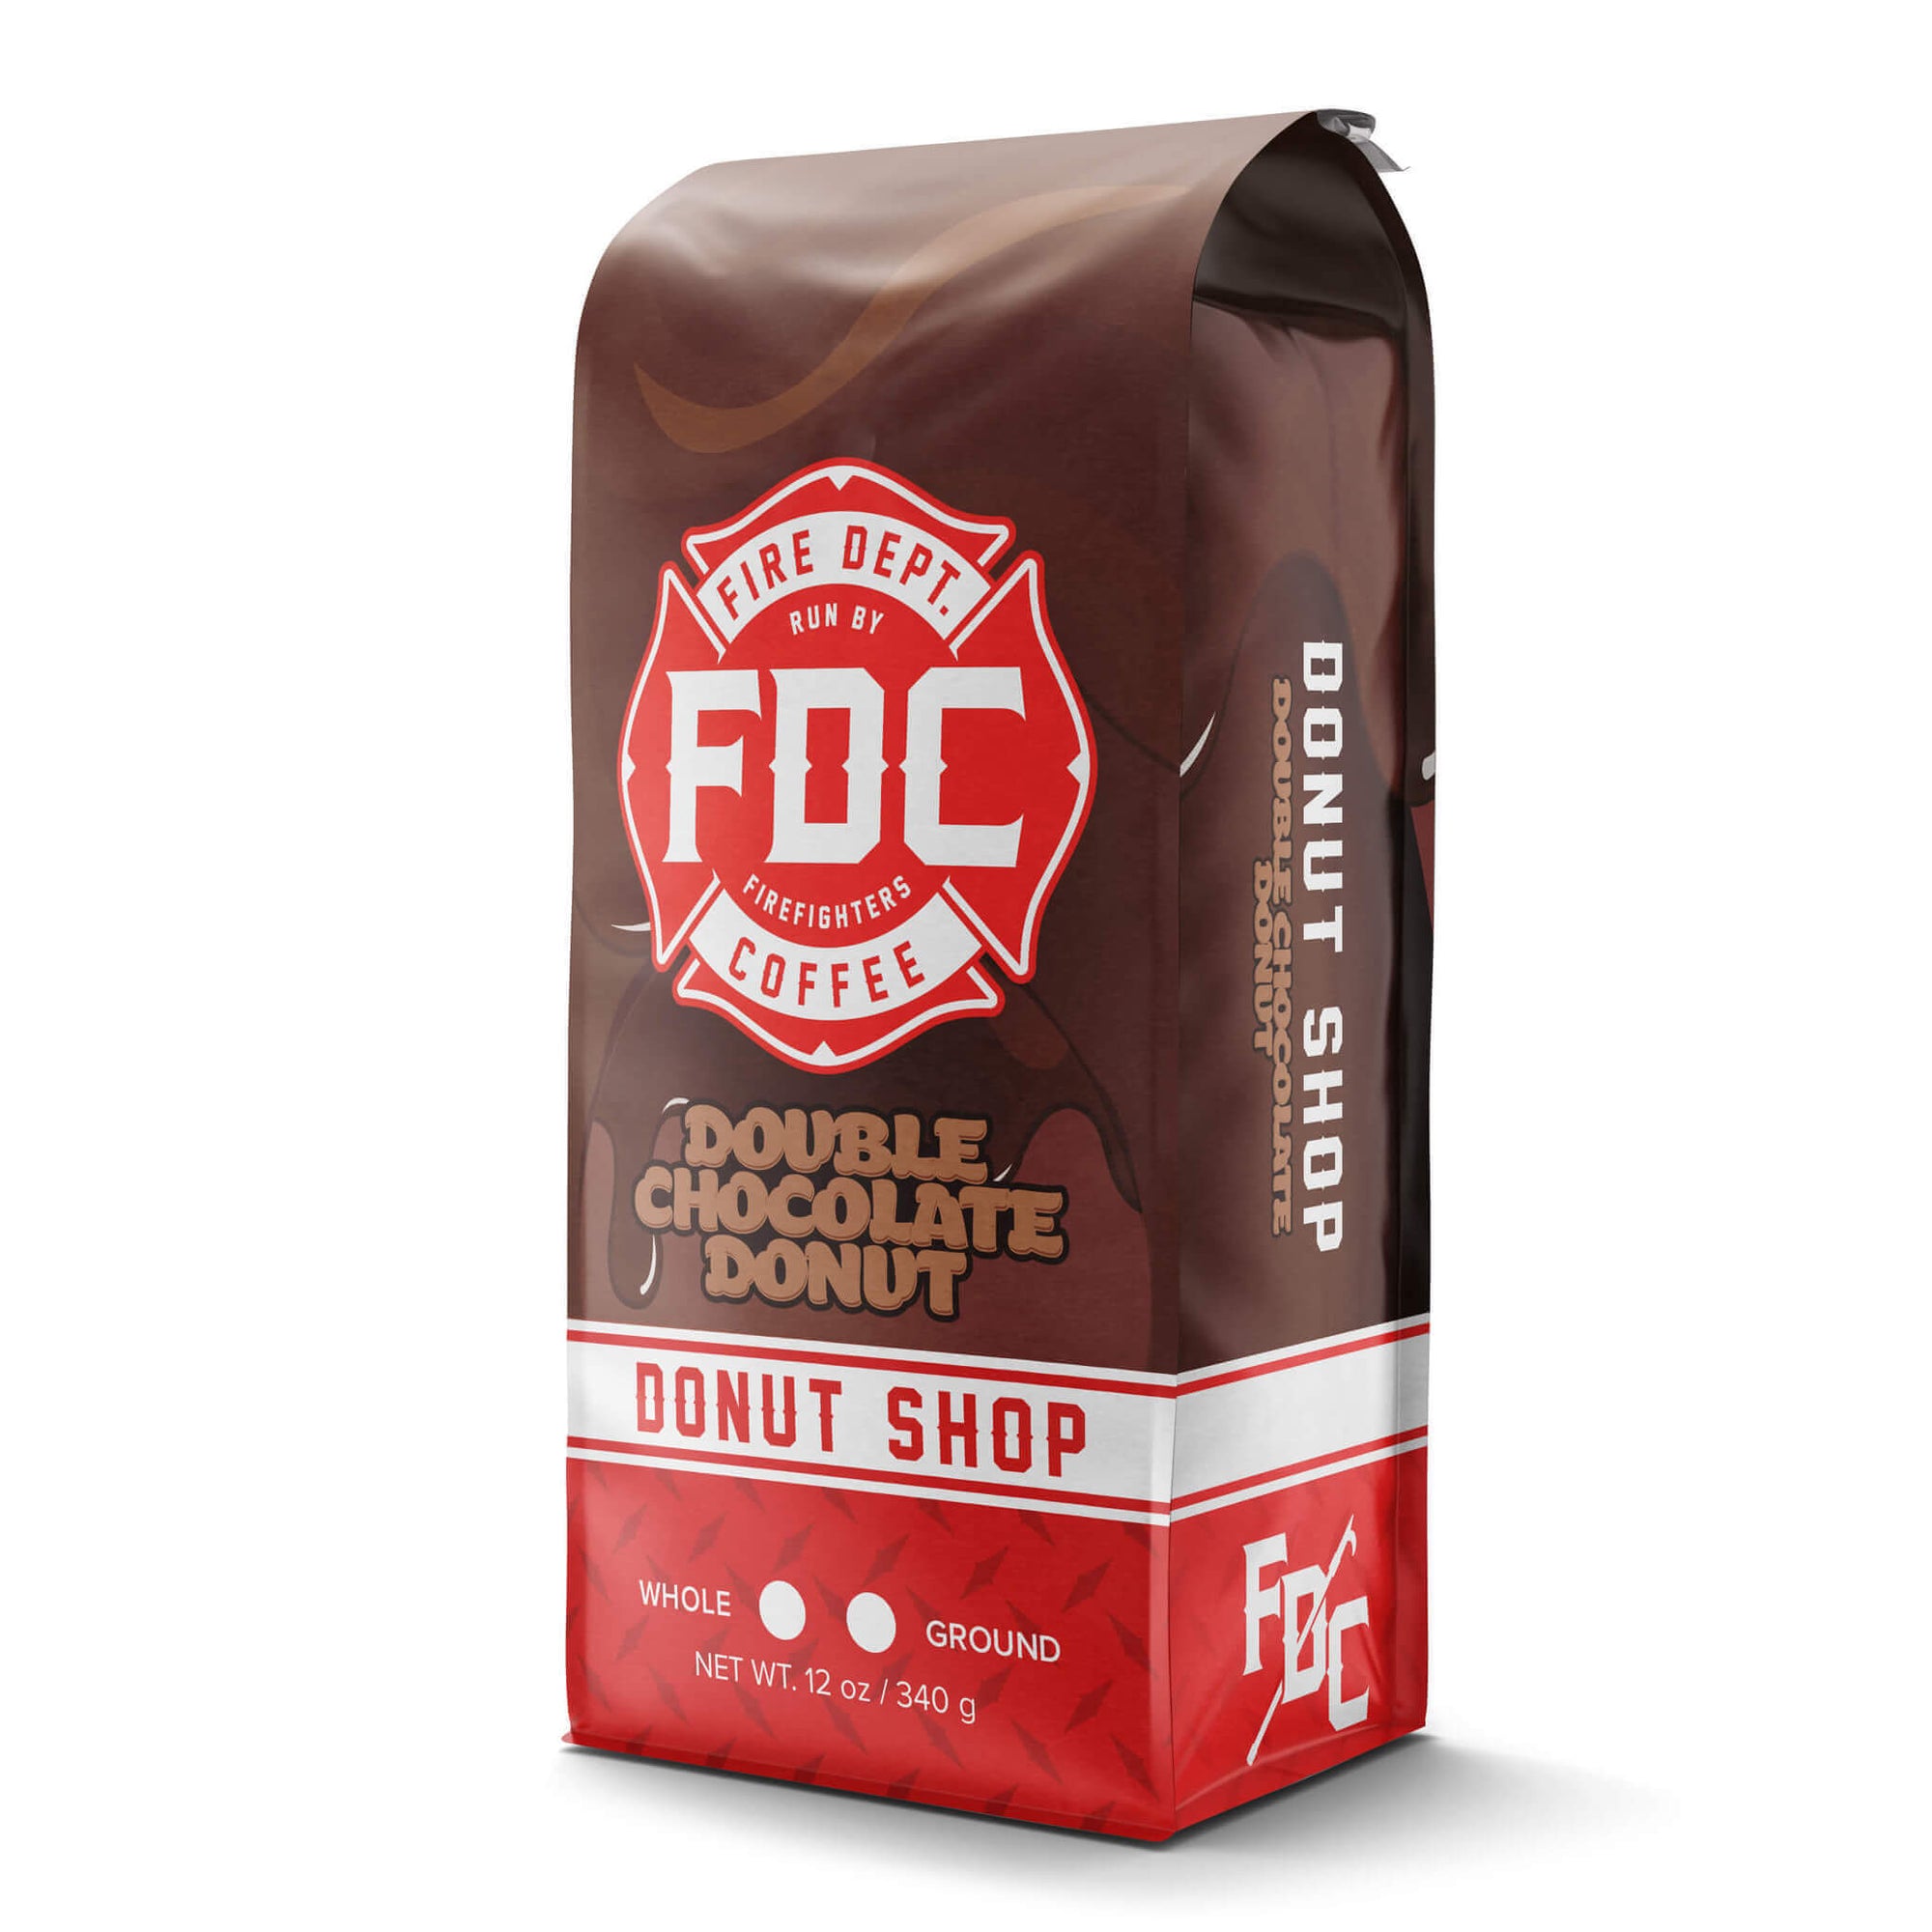 Fire Dept. Coffee's 12 ounce Double Chocolate Donut Shop Coffee in a rectangular package